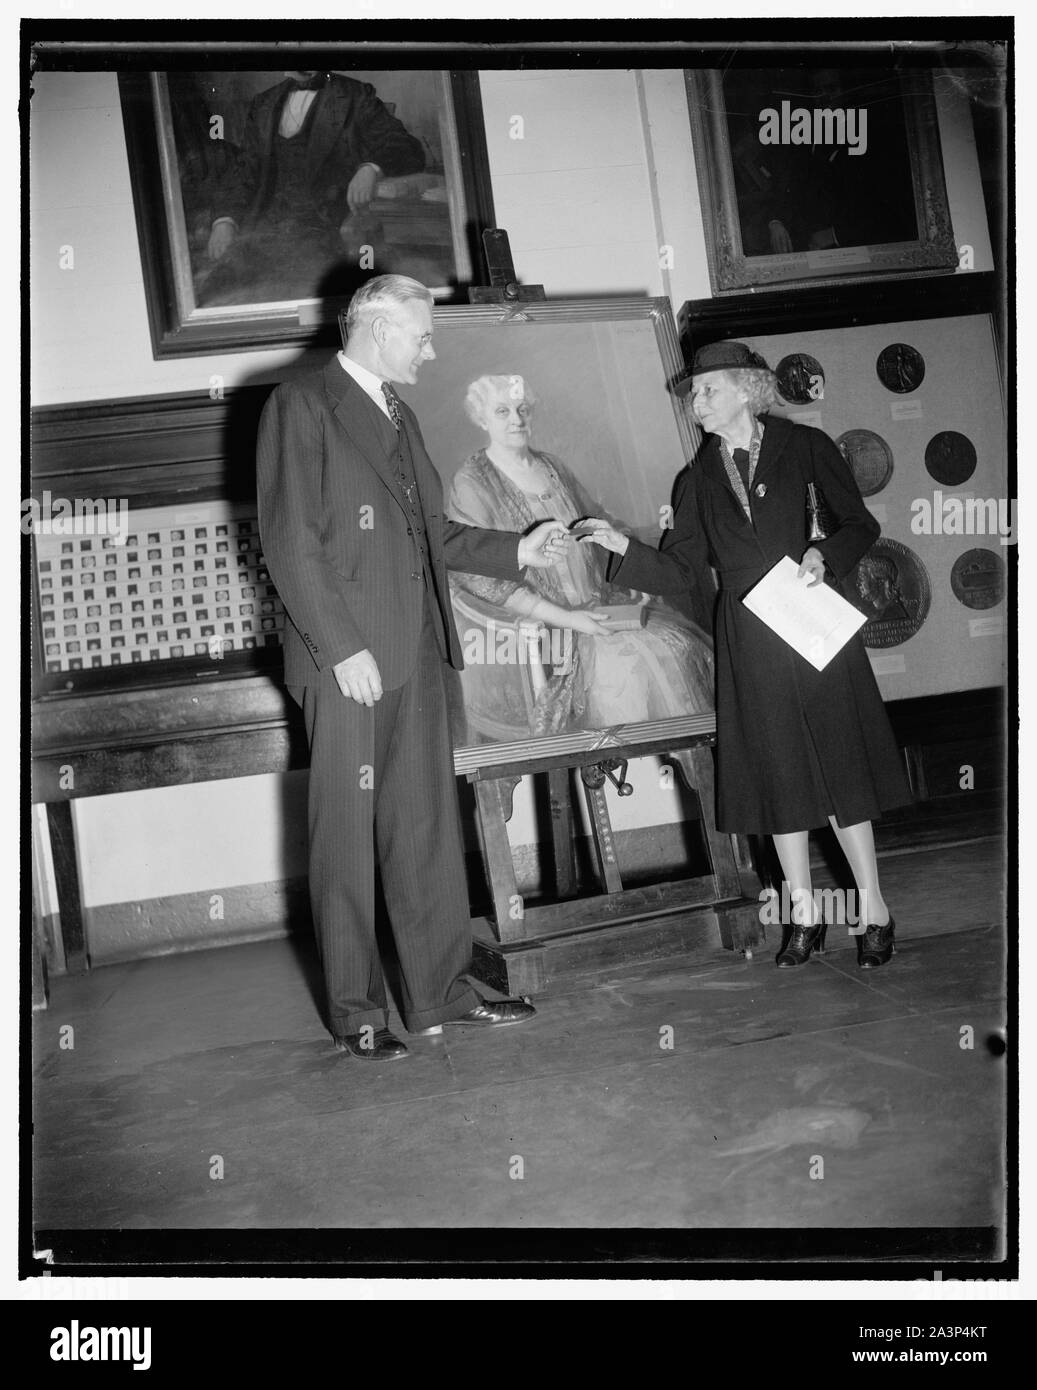 Smithsonian receives portrait of famed suffrage leader. Washington, D.C., Nov. 17. Miss Marguerite H. Welles, President of the National League of Women Voters, presenting to Dr. Alexander Wetmore, Assistant Secretary of the Smithsonian Institution, an oil painting of 80 year old Carrie Chapman Catt. The portrait will be hung in the Smithsonian Institution with the ones of three other famed suffrage leaders: Susan B. Anthony, Elizabeth Cady Stanton, and Dr. Anna Howard Shaw. A gift of Mrs. Stanley McCormick of Chicago, the portrait was painted by Mary Foote in 1927 Stock Photo